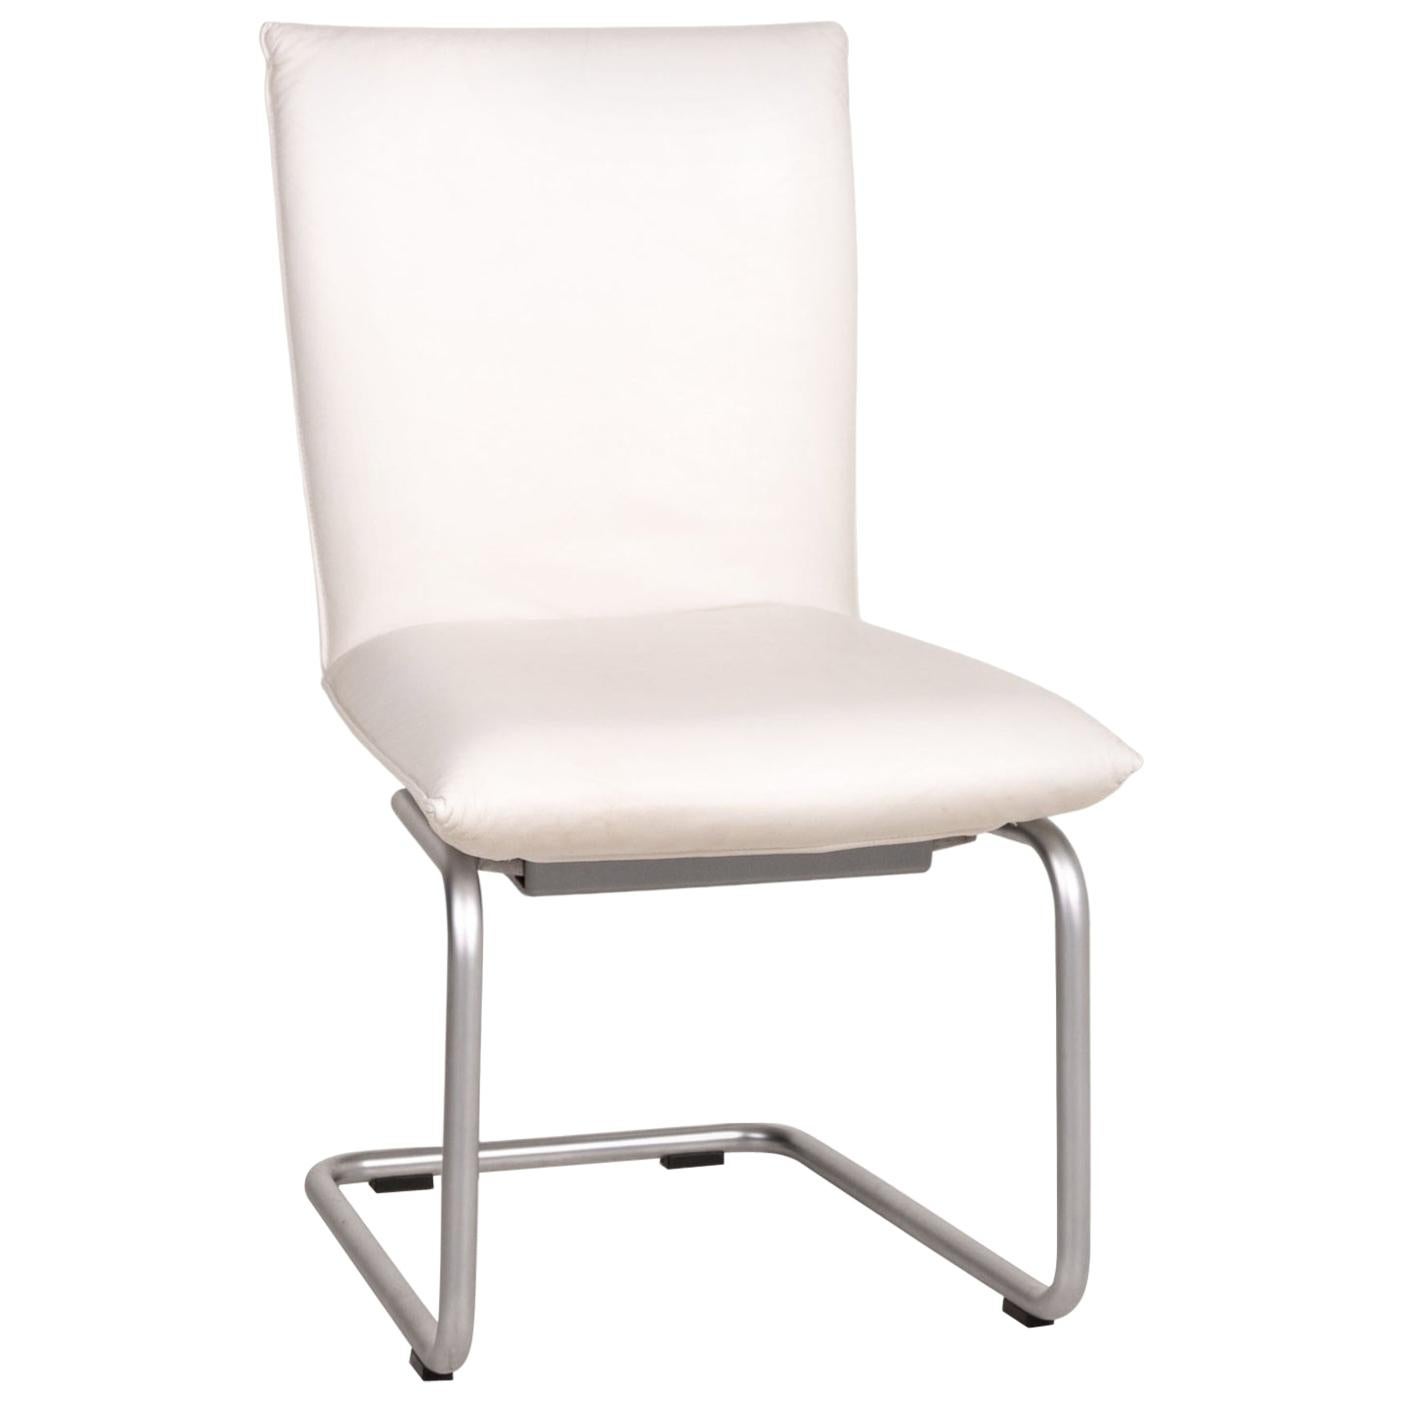 Rolf Benz 620 Leather Chair Cream Cantilever